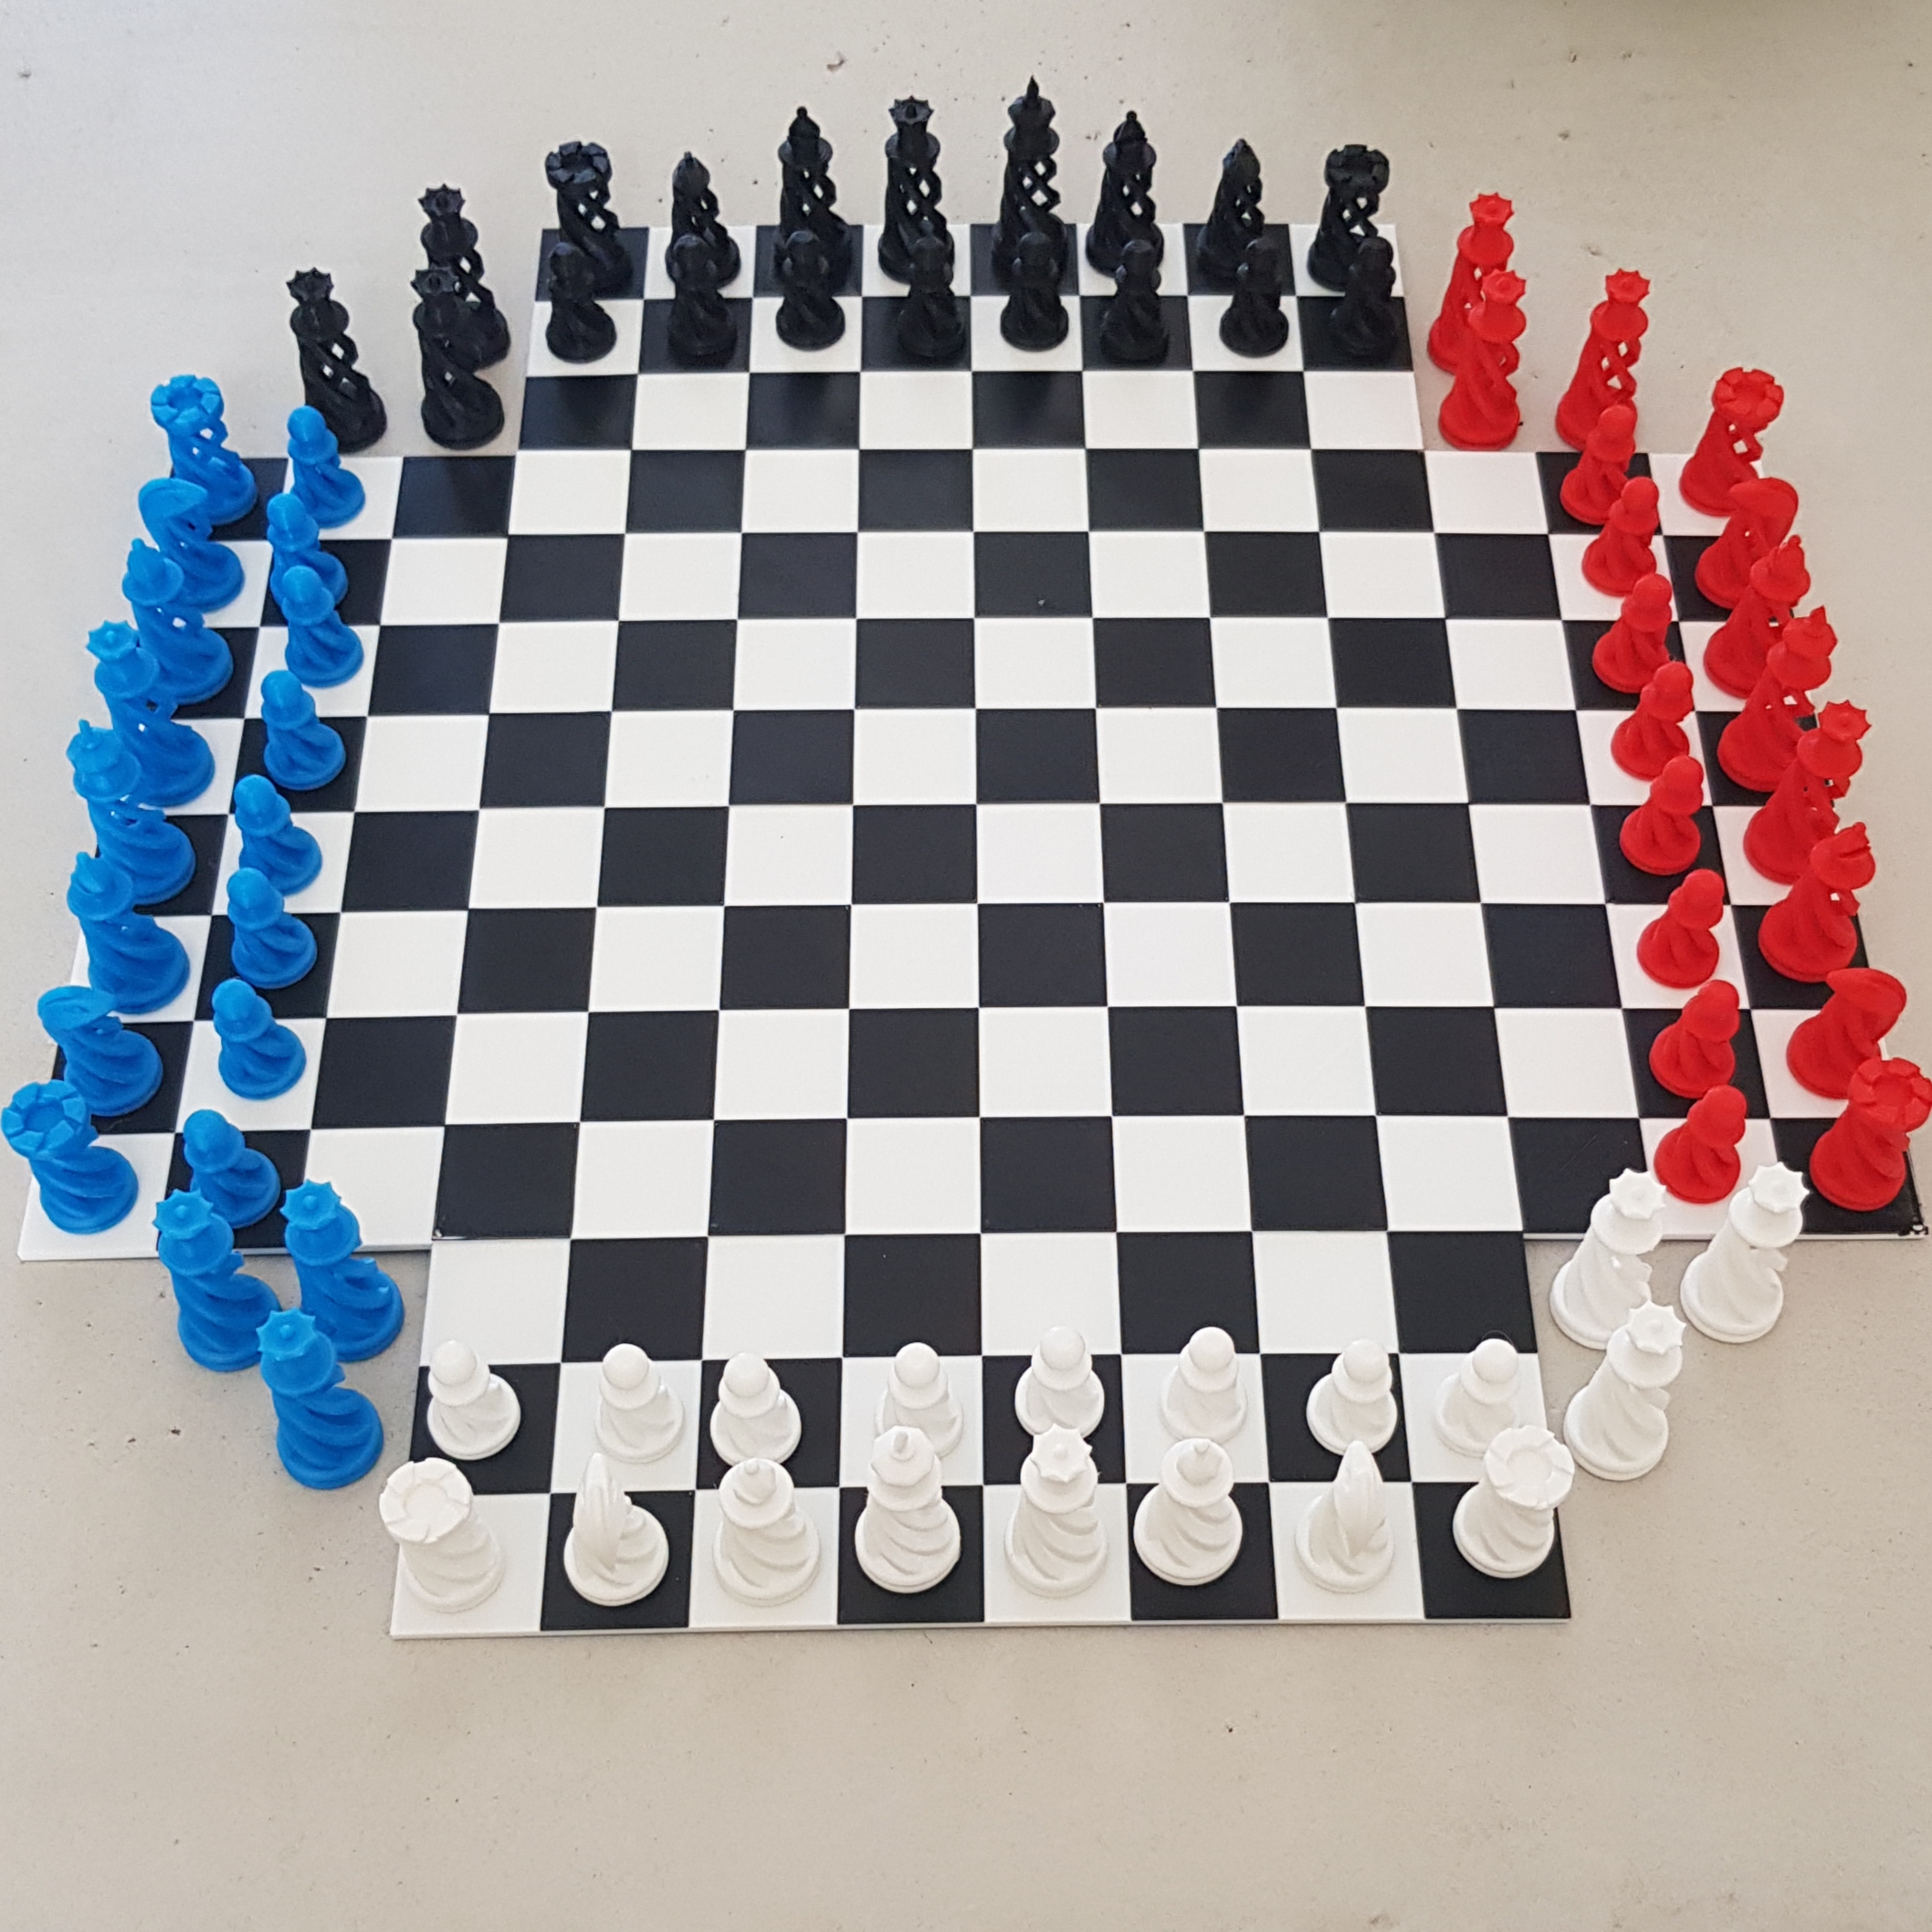 Four-player chess, 3D CAD Model Library